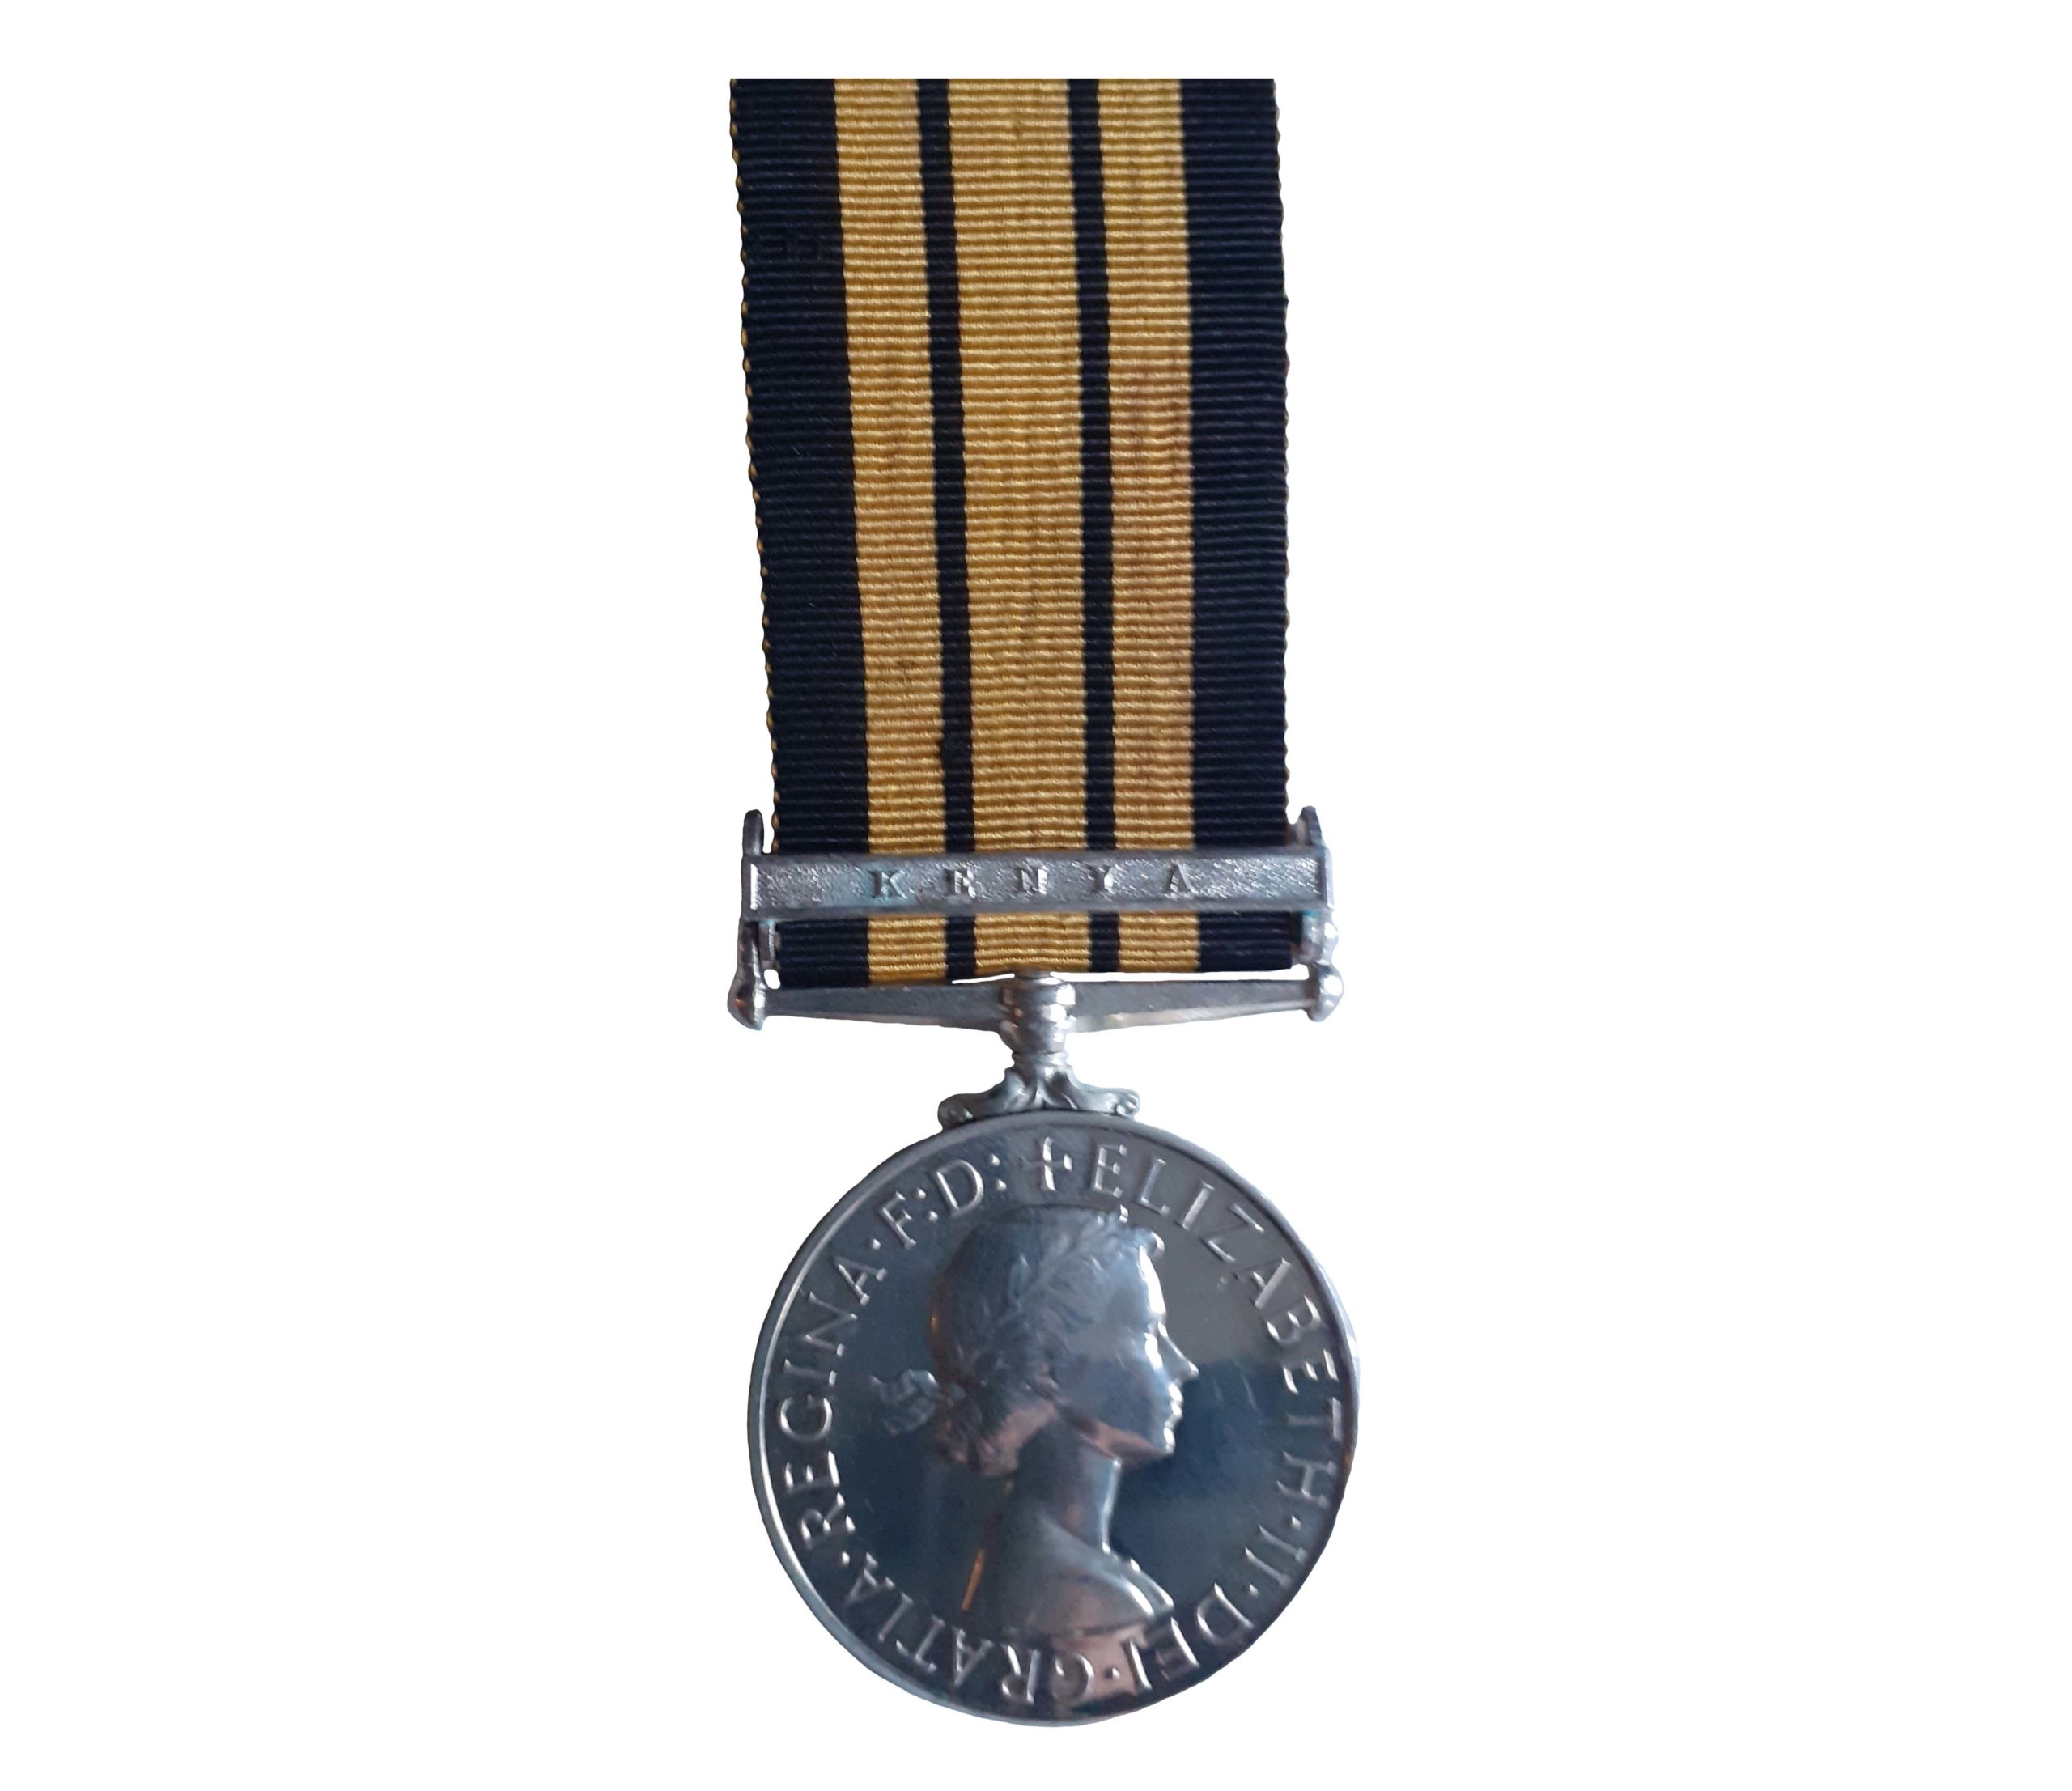 Africa General Service Medal, 1902-56, EiiR, one clasp, Kenya, to Reserve Police Constable Thomas Nthiwa